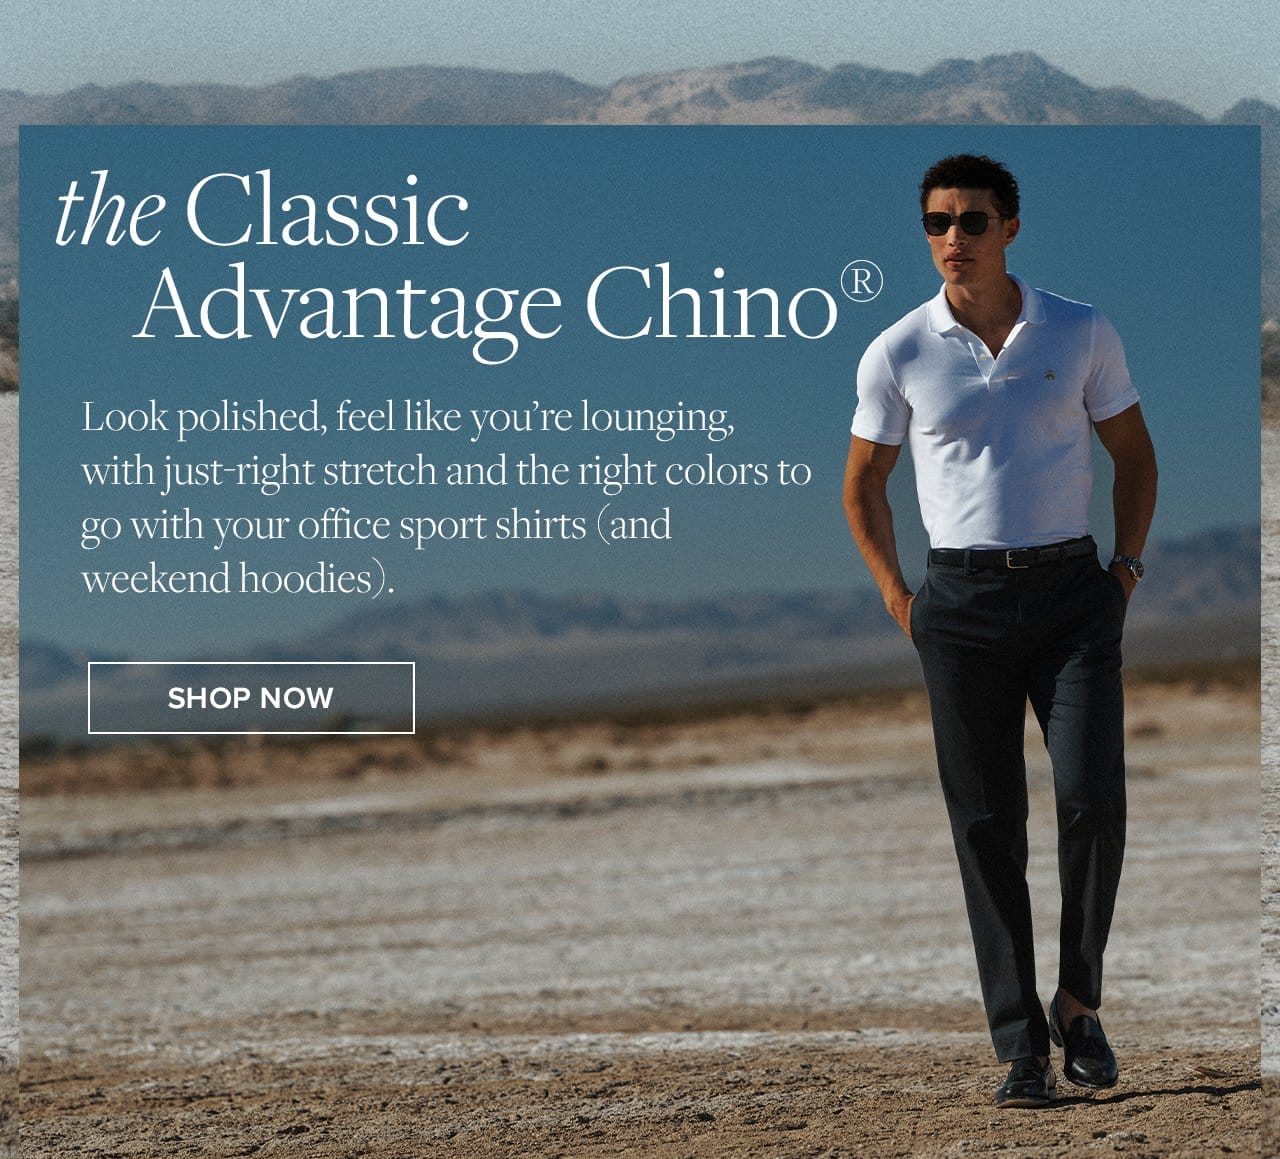 the Classic Advantage Chino Look polished, feel like you're lounging, with just-right stretch and the right colors to go with your office sport shirts (and weekend hoodies). Shop Now